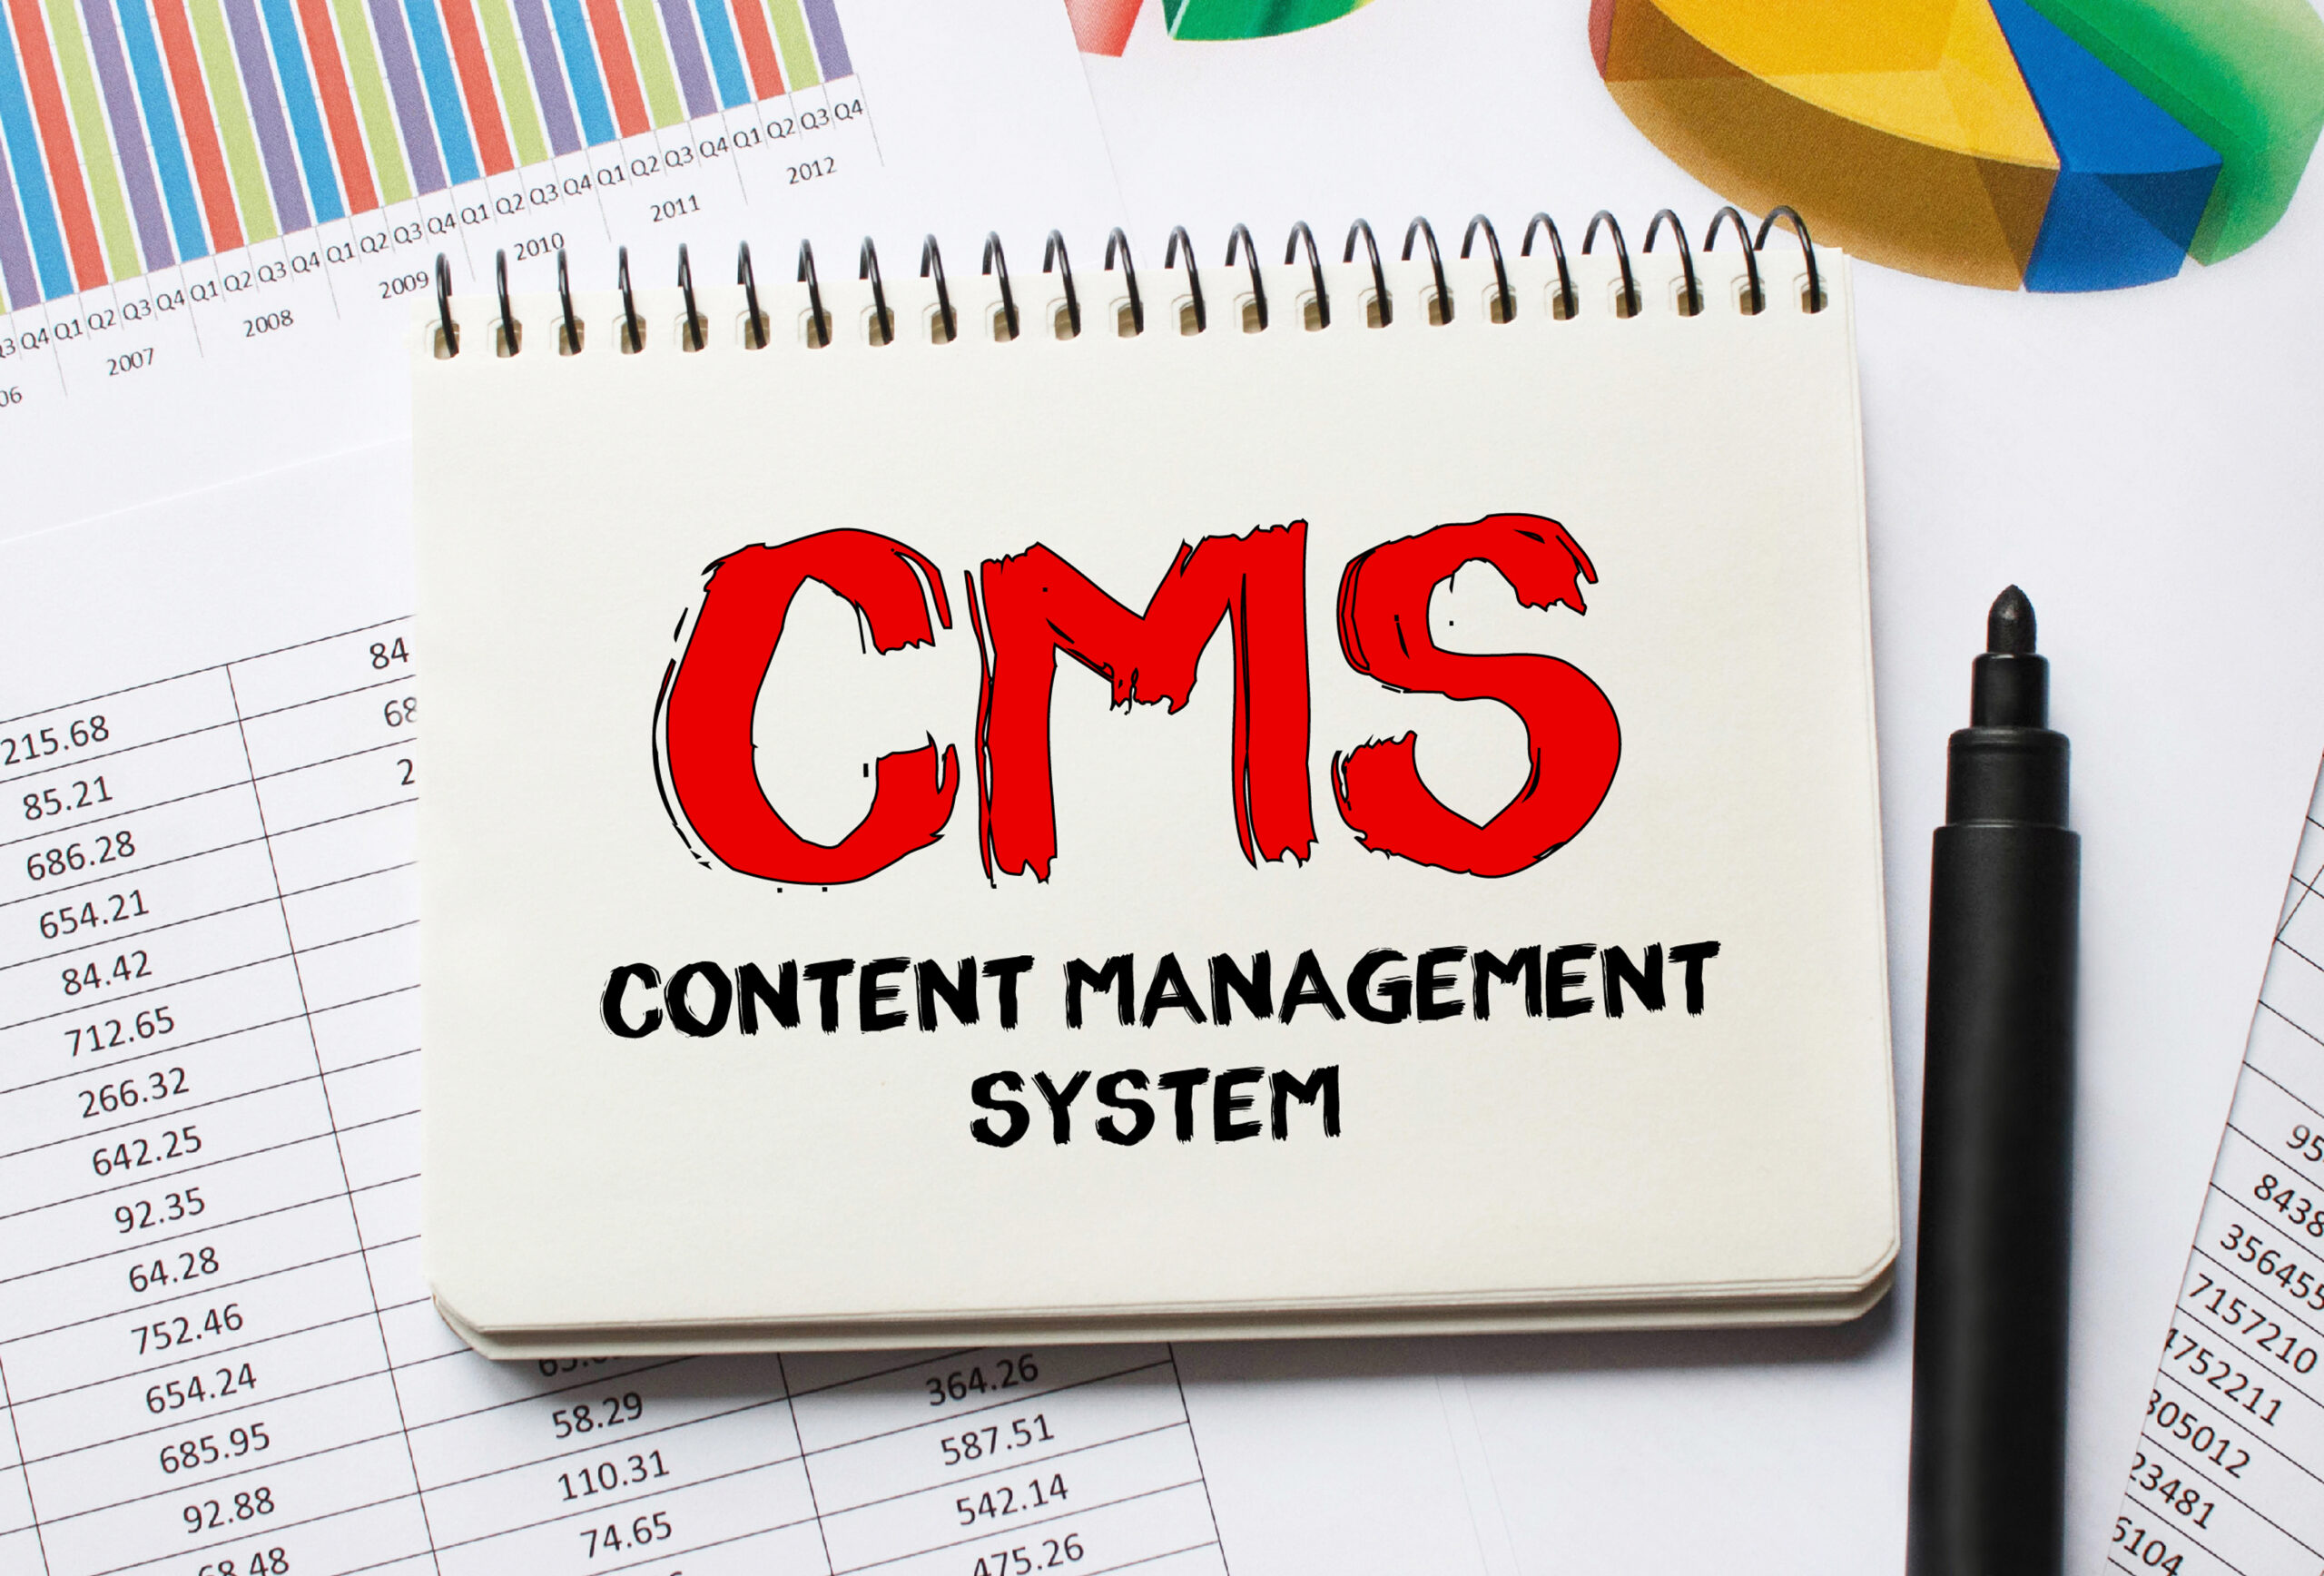 Notes about CMS